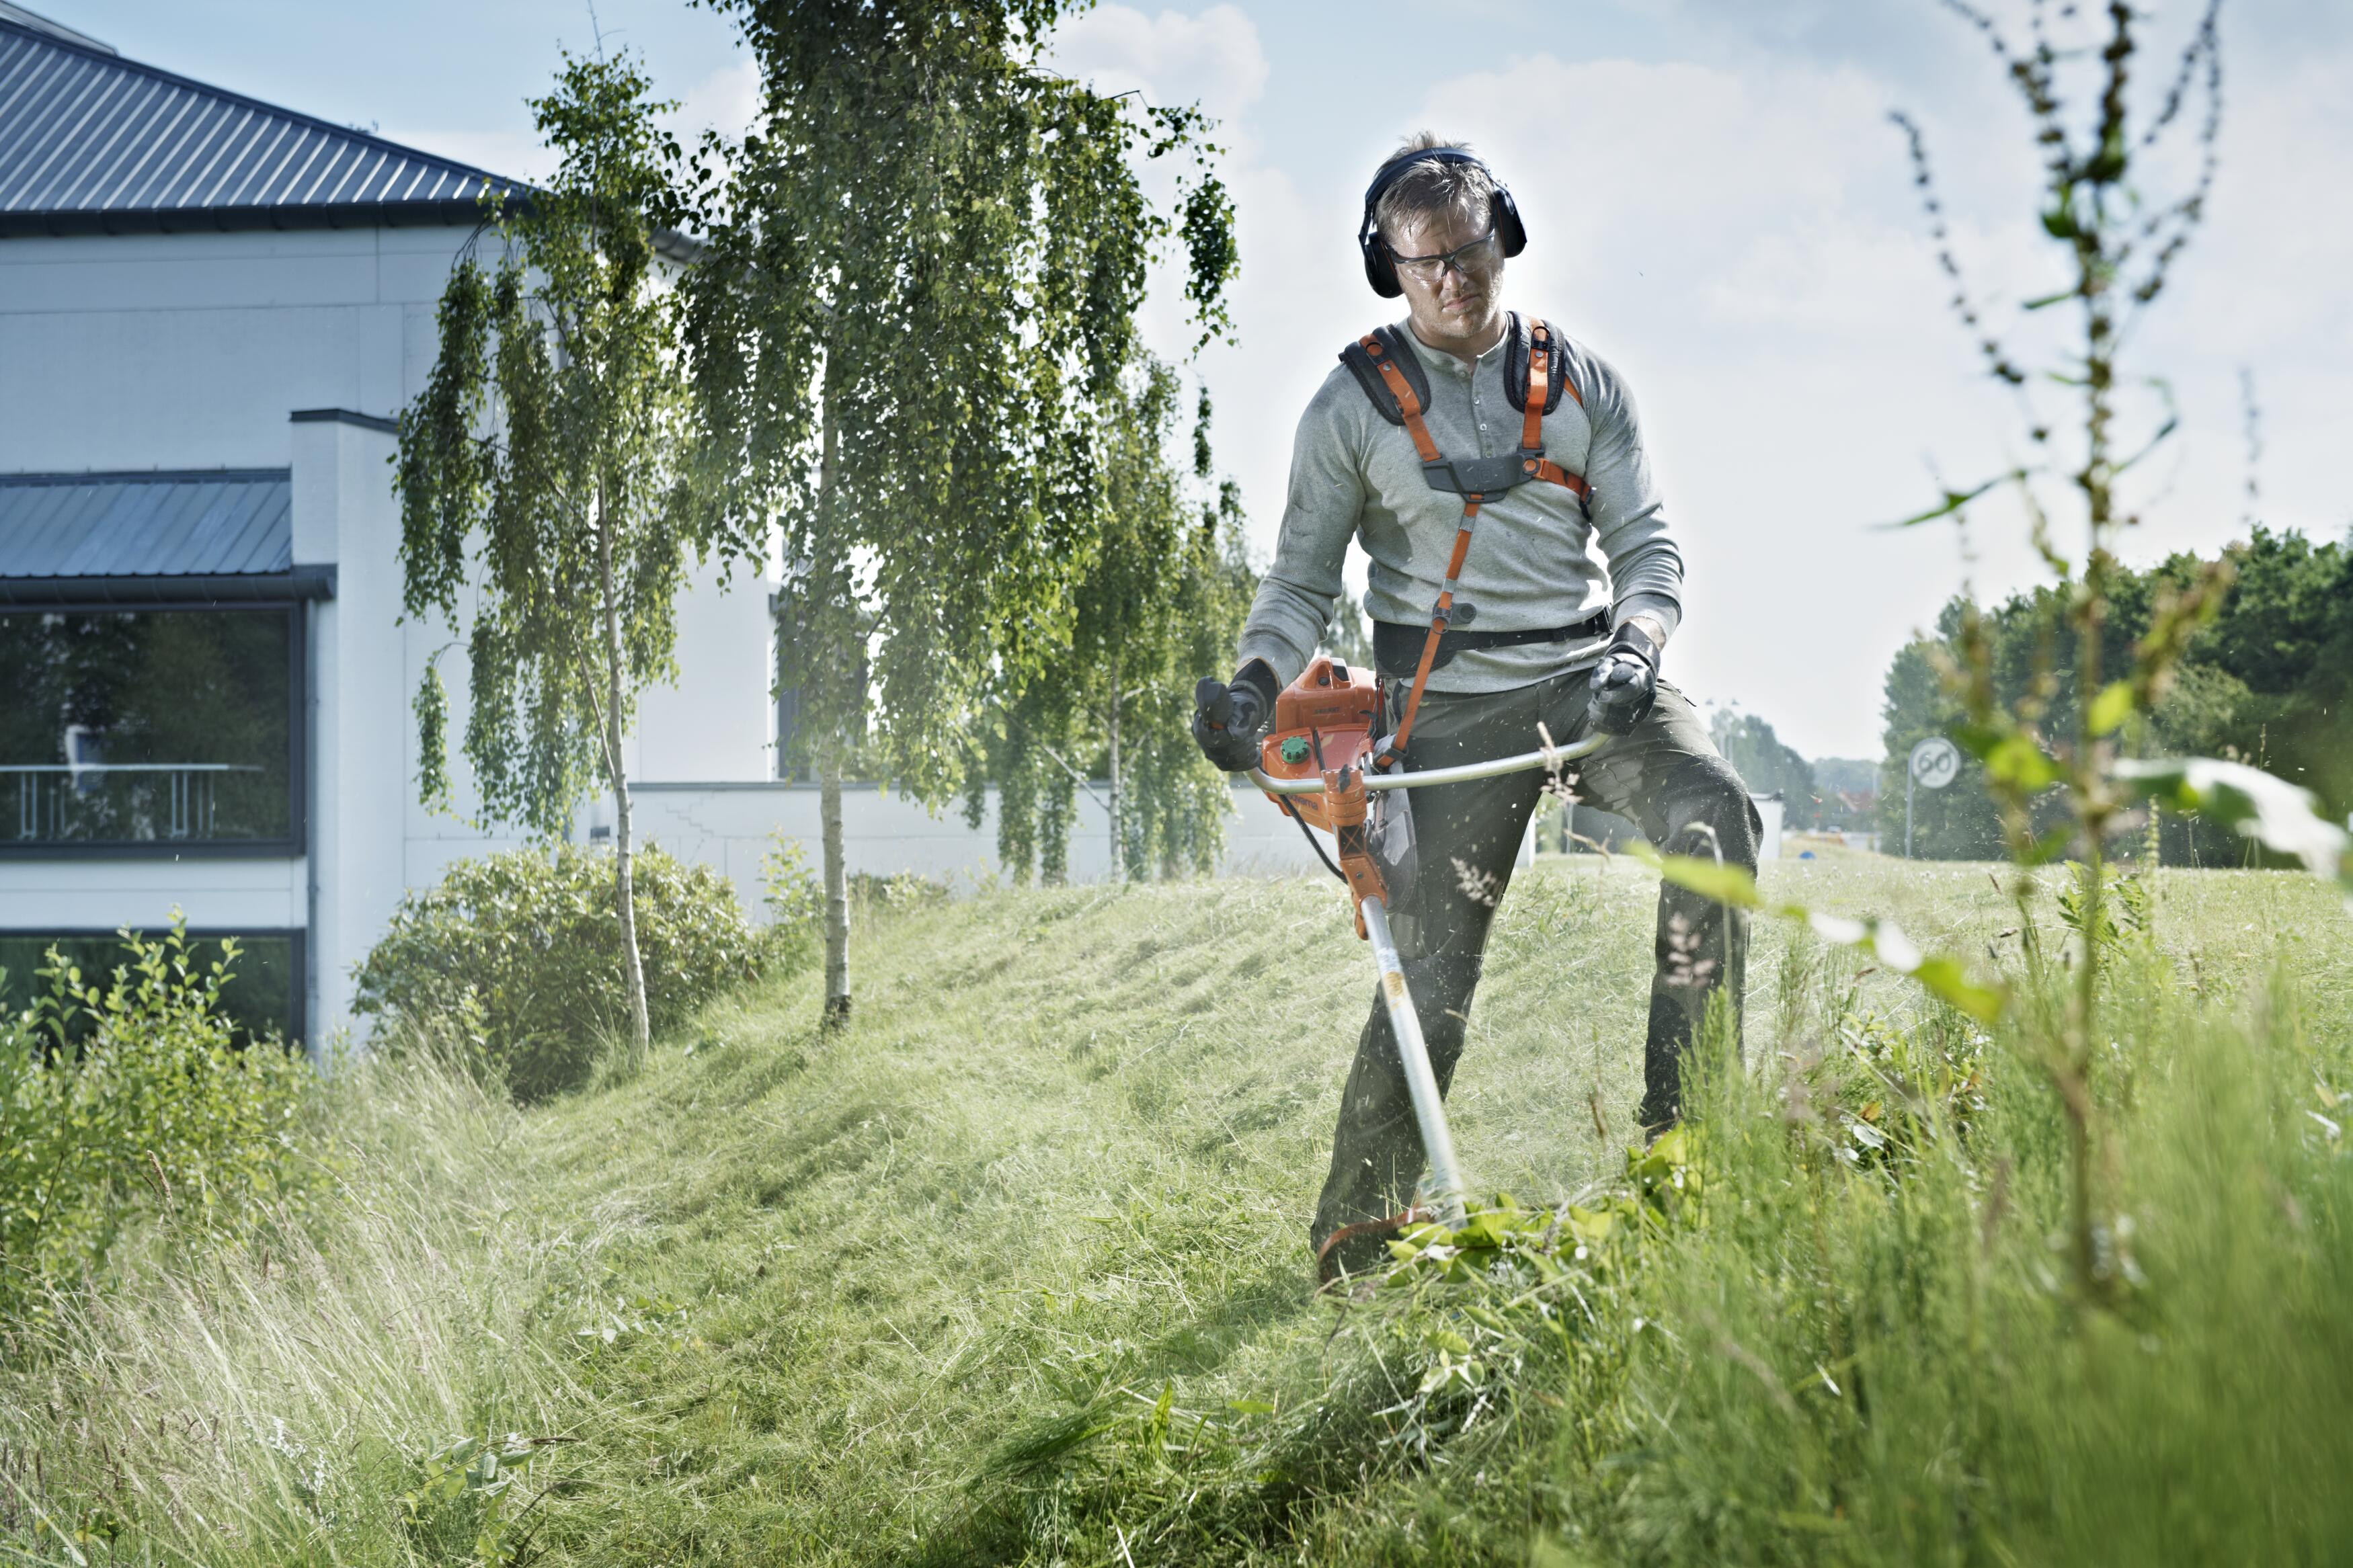 The X-TORQ® engine in a Husqvarna Brushcutter reduces exhaust emissions and increases fuel efficiency